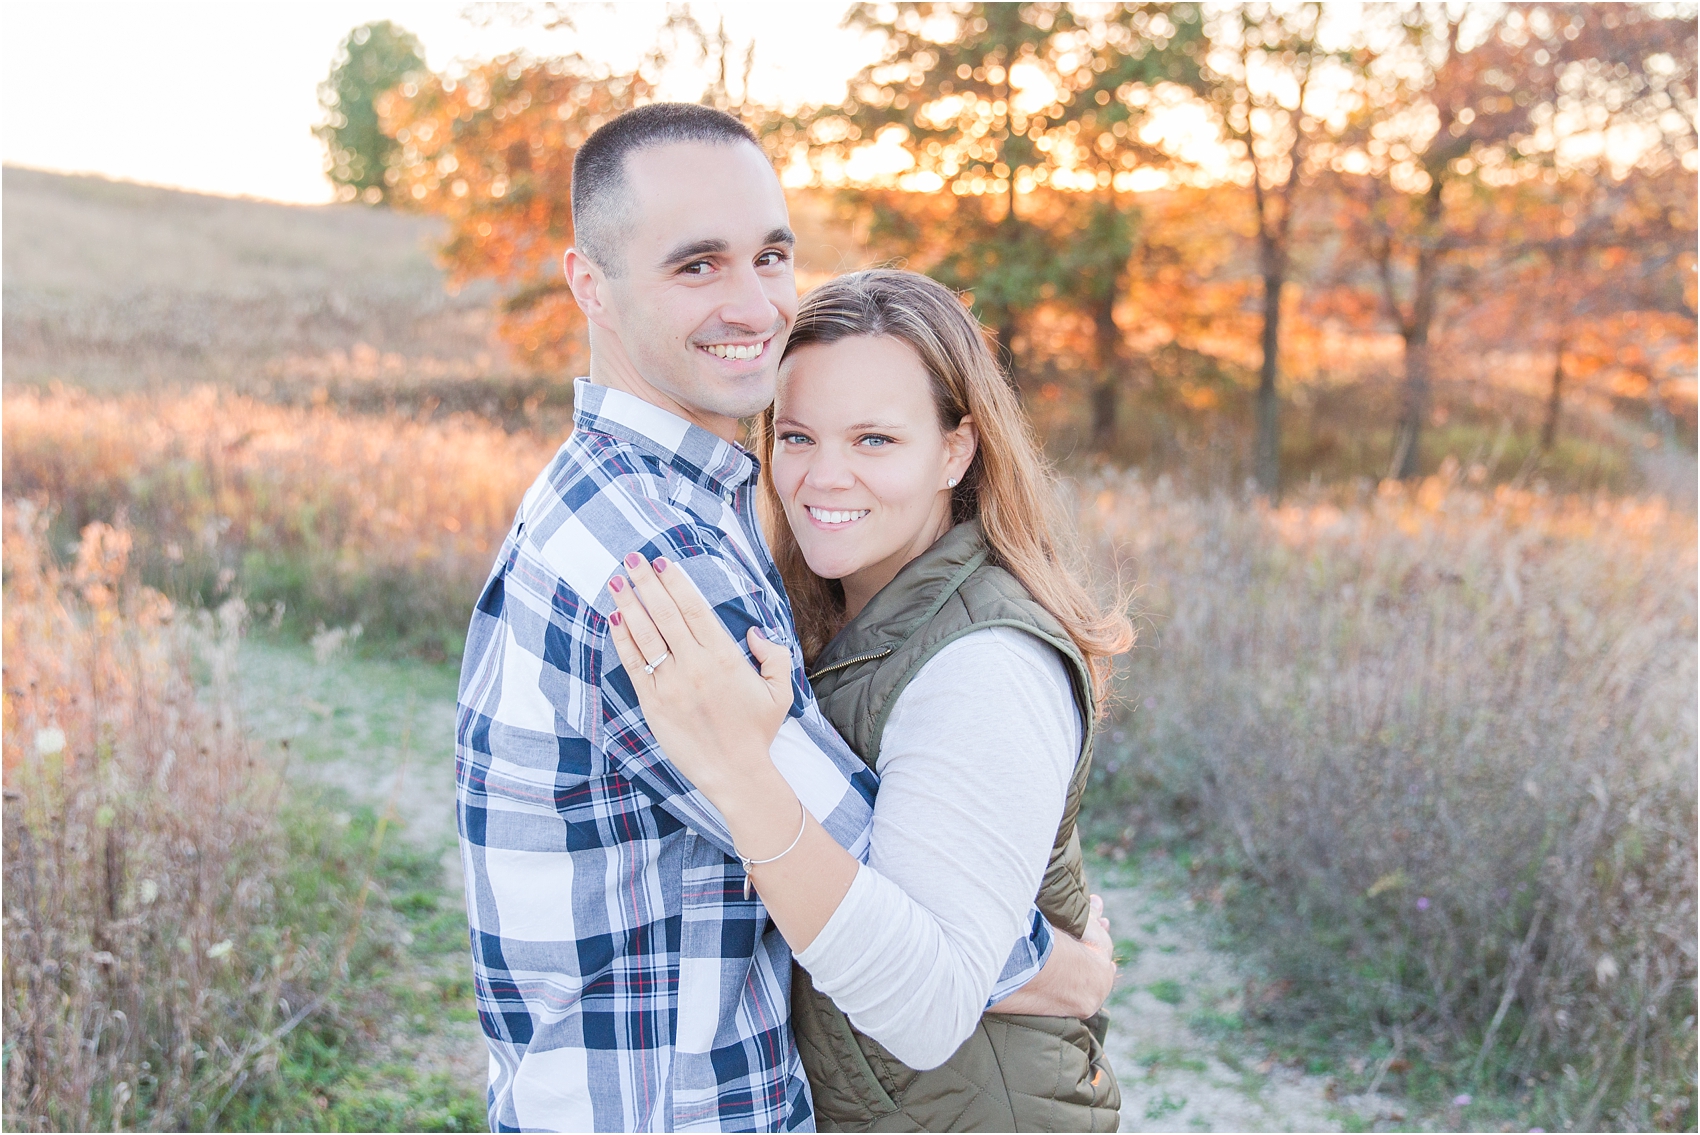 romantic-fall-engagement-photos-at-indian-springs-metropark-in-clarkston-mi-by-courtney-carolyn-photography_0031.jpg